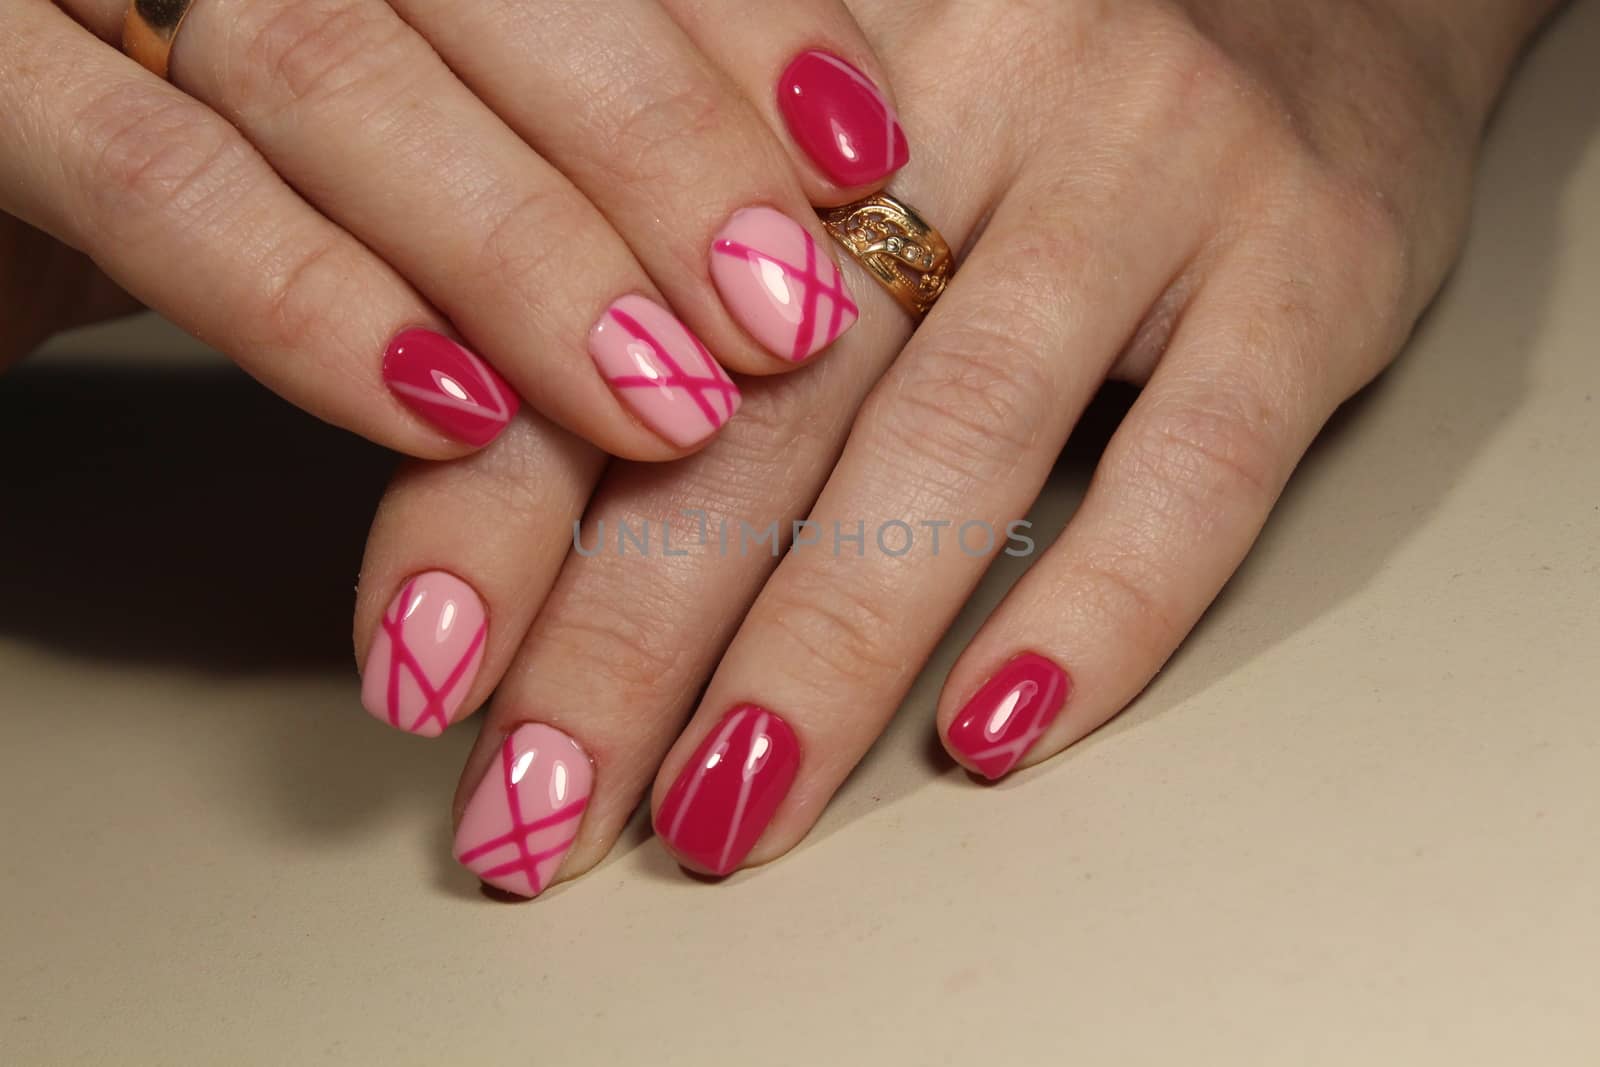 Manicured nails with pink nail polish. by SmirMaxStock